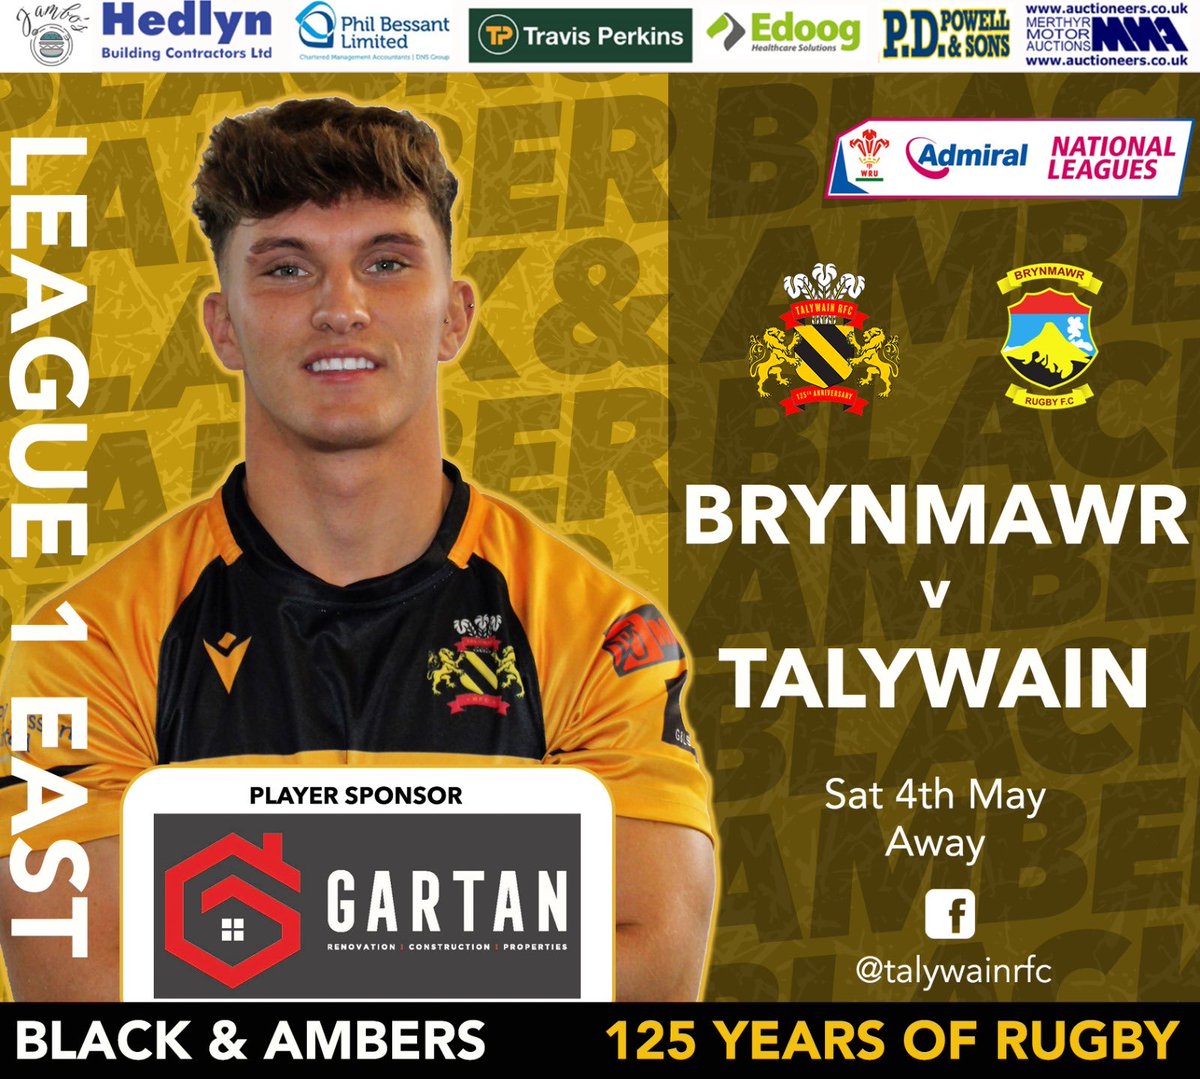 This Saturday is our last away game of the season and its a big one! We travel to Brynmawr to face the league leaders and look to avenge the result from earlier in the year. Come and get behind the boys and show them your support in this top of the table clash. 🖤💛🖤💛